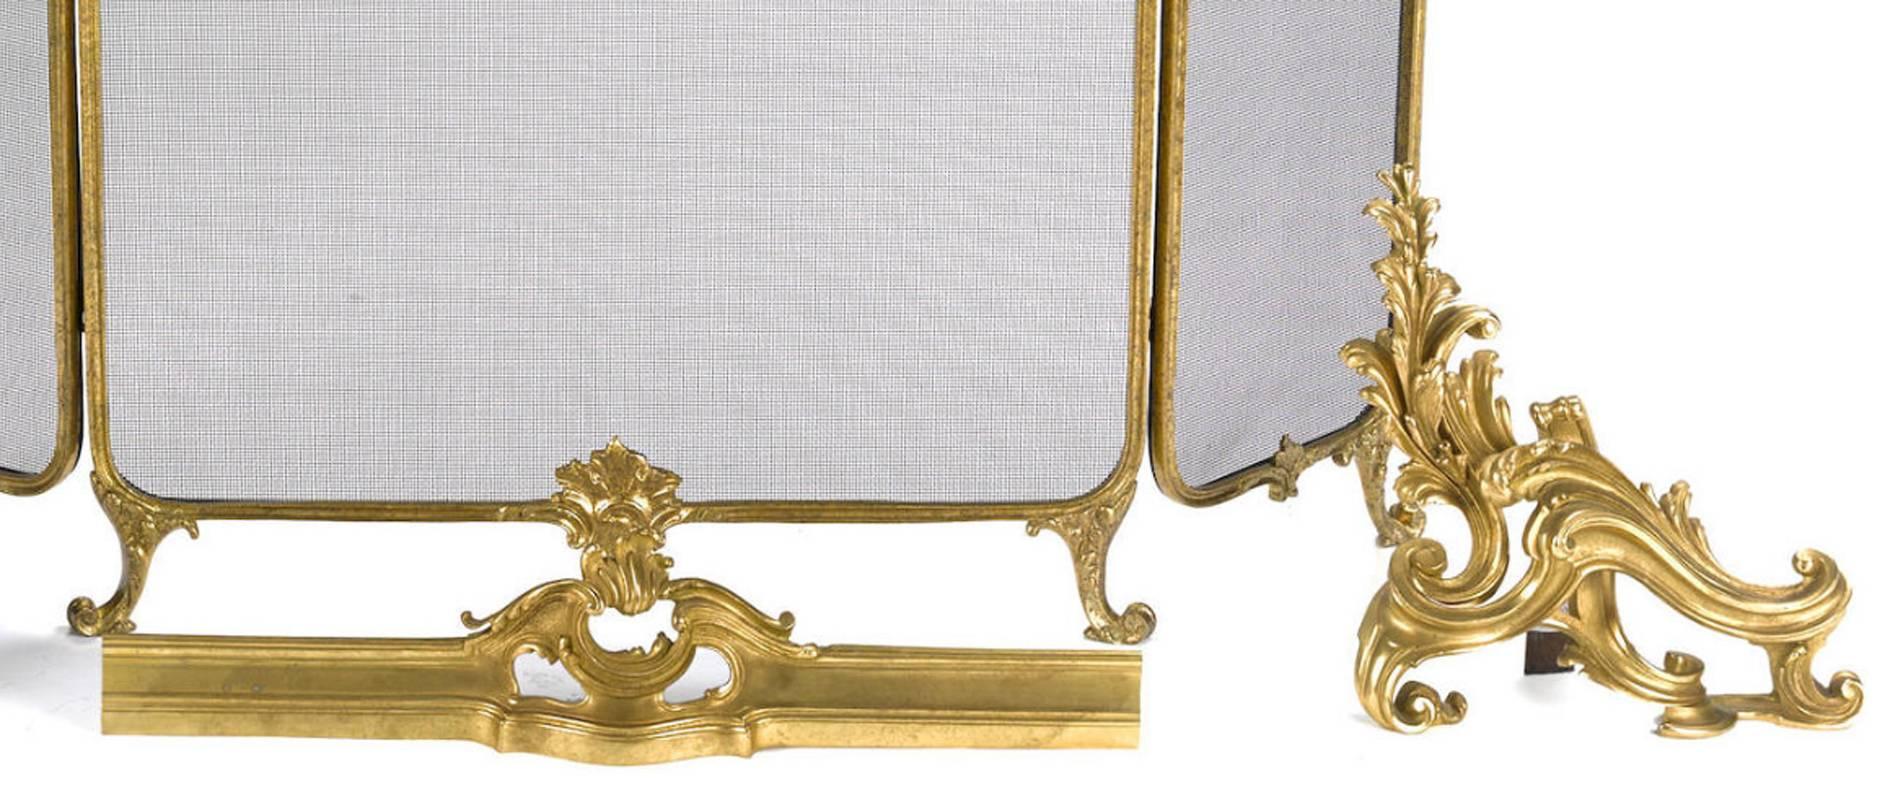 Good quality set of four-piece Louis XV style ormolu fireplace fender and chenets with a acanthus leaf and scrolls motif, early 20th century.
The measurement for the chenets are: Height 14 inches x width 14 inches x depth 5 inches.
The measurement